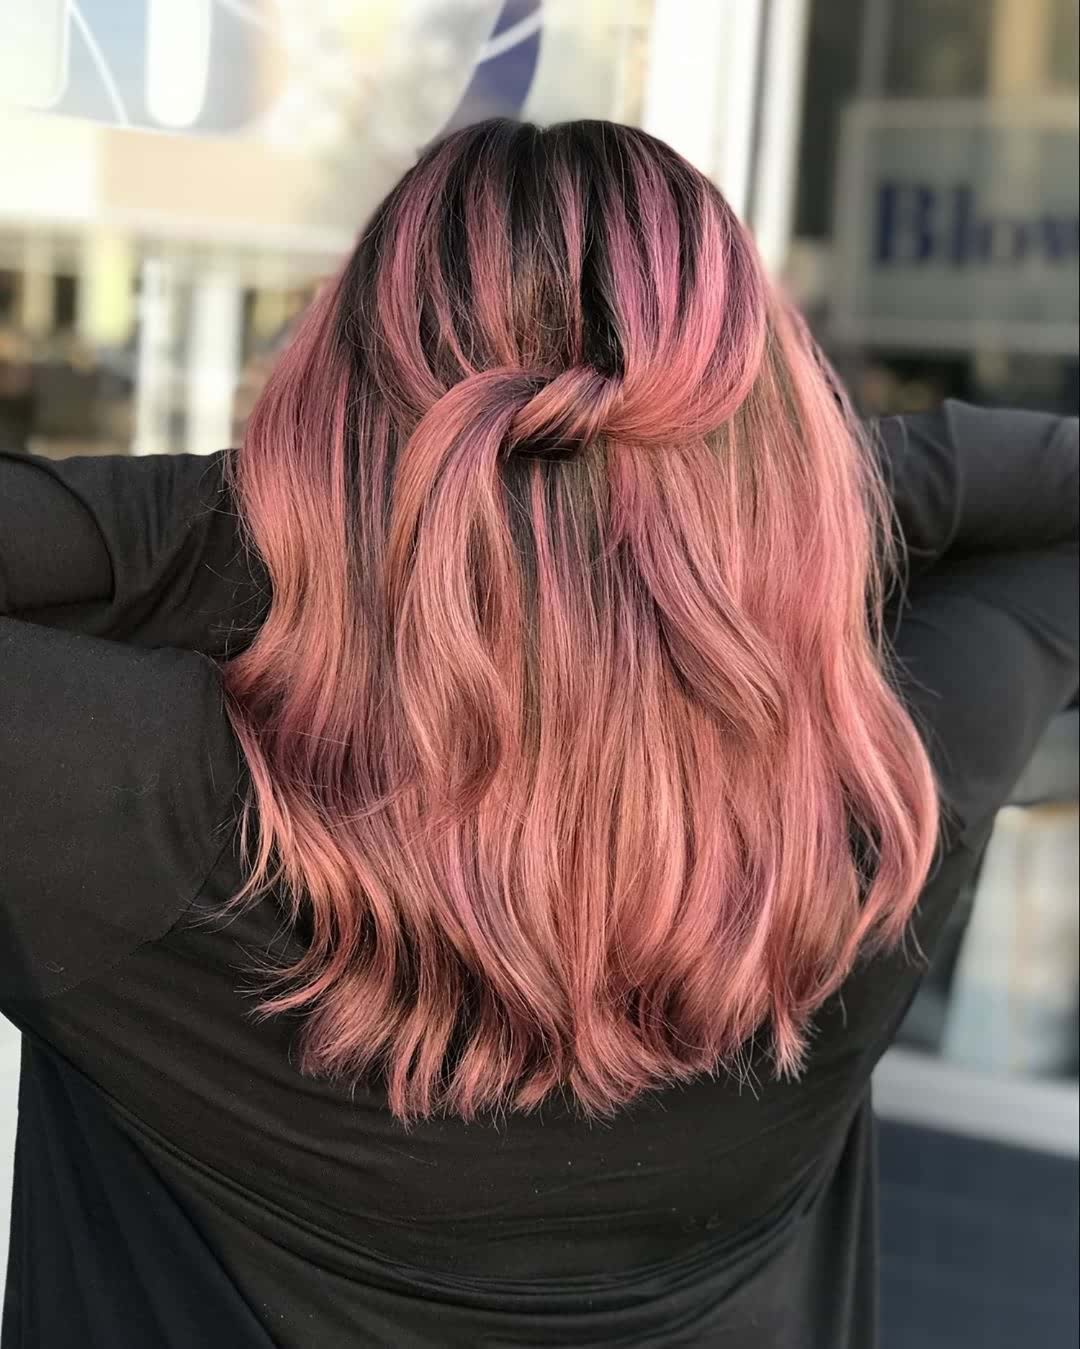 11 Trending Hair Color Ideas for Women - Her Style Code